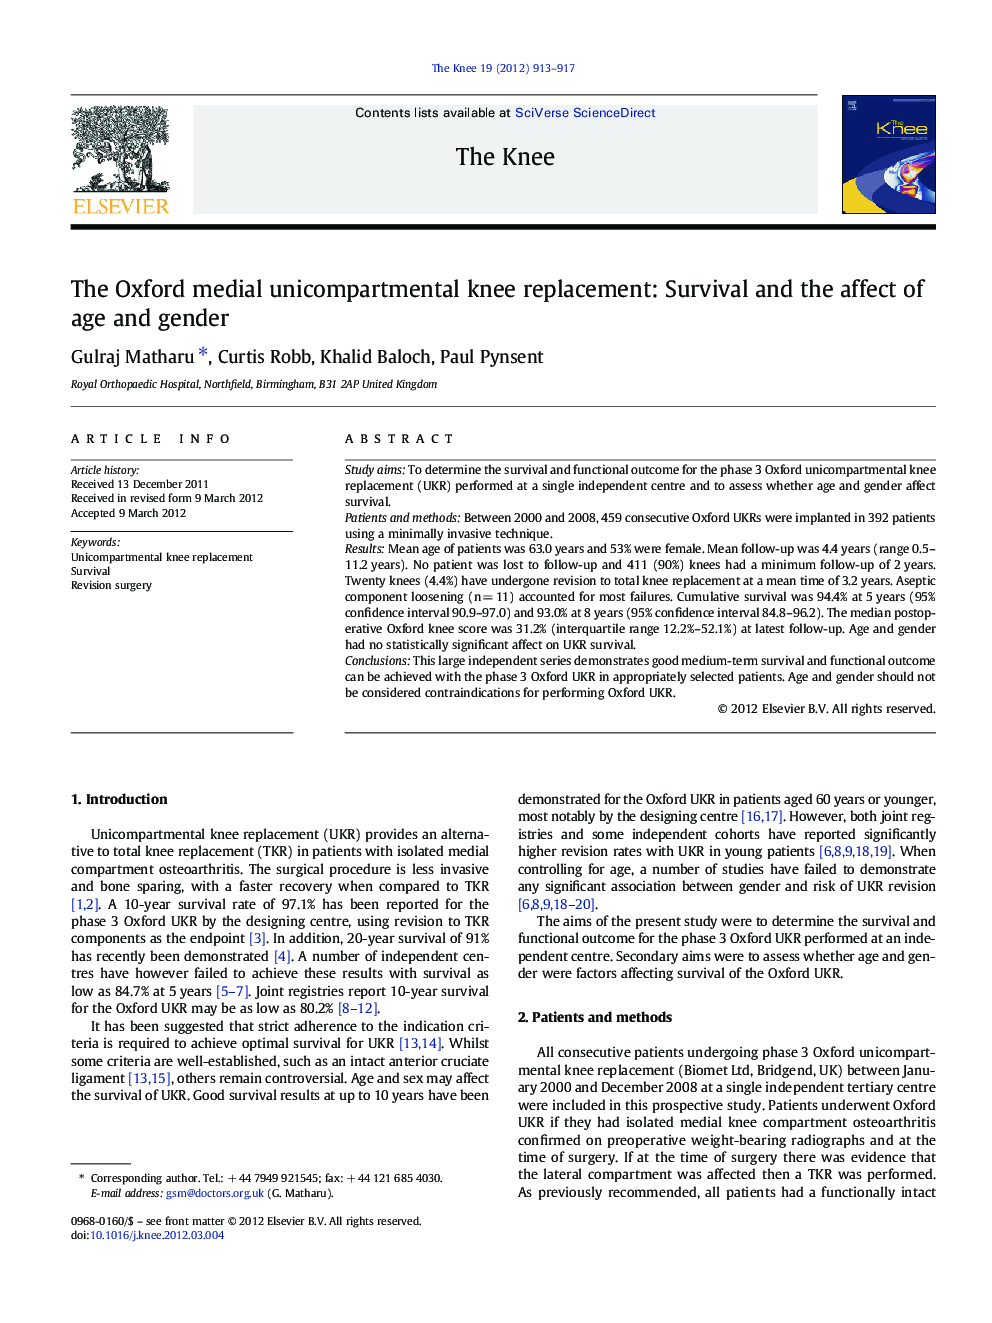 The Oxford medial unicompartmental knee replacement: Survival and the affect of age and gender